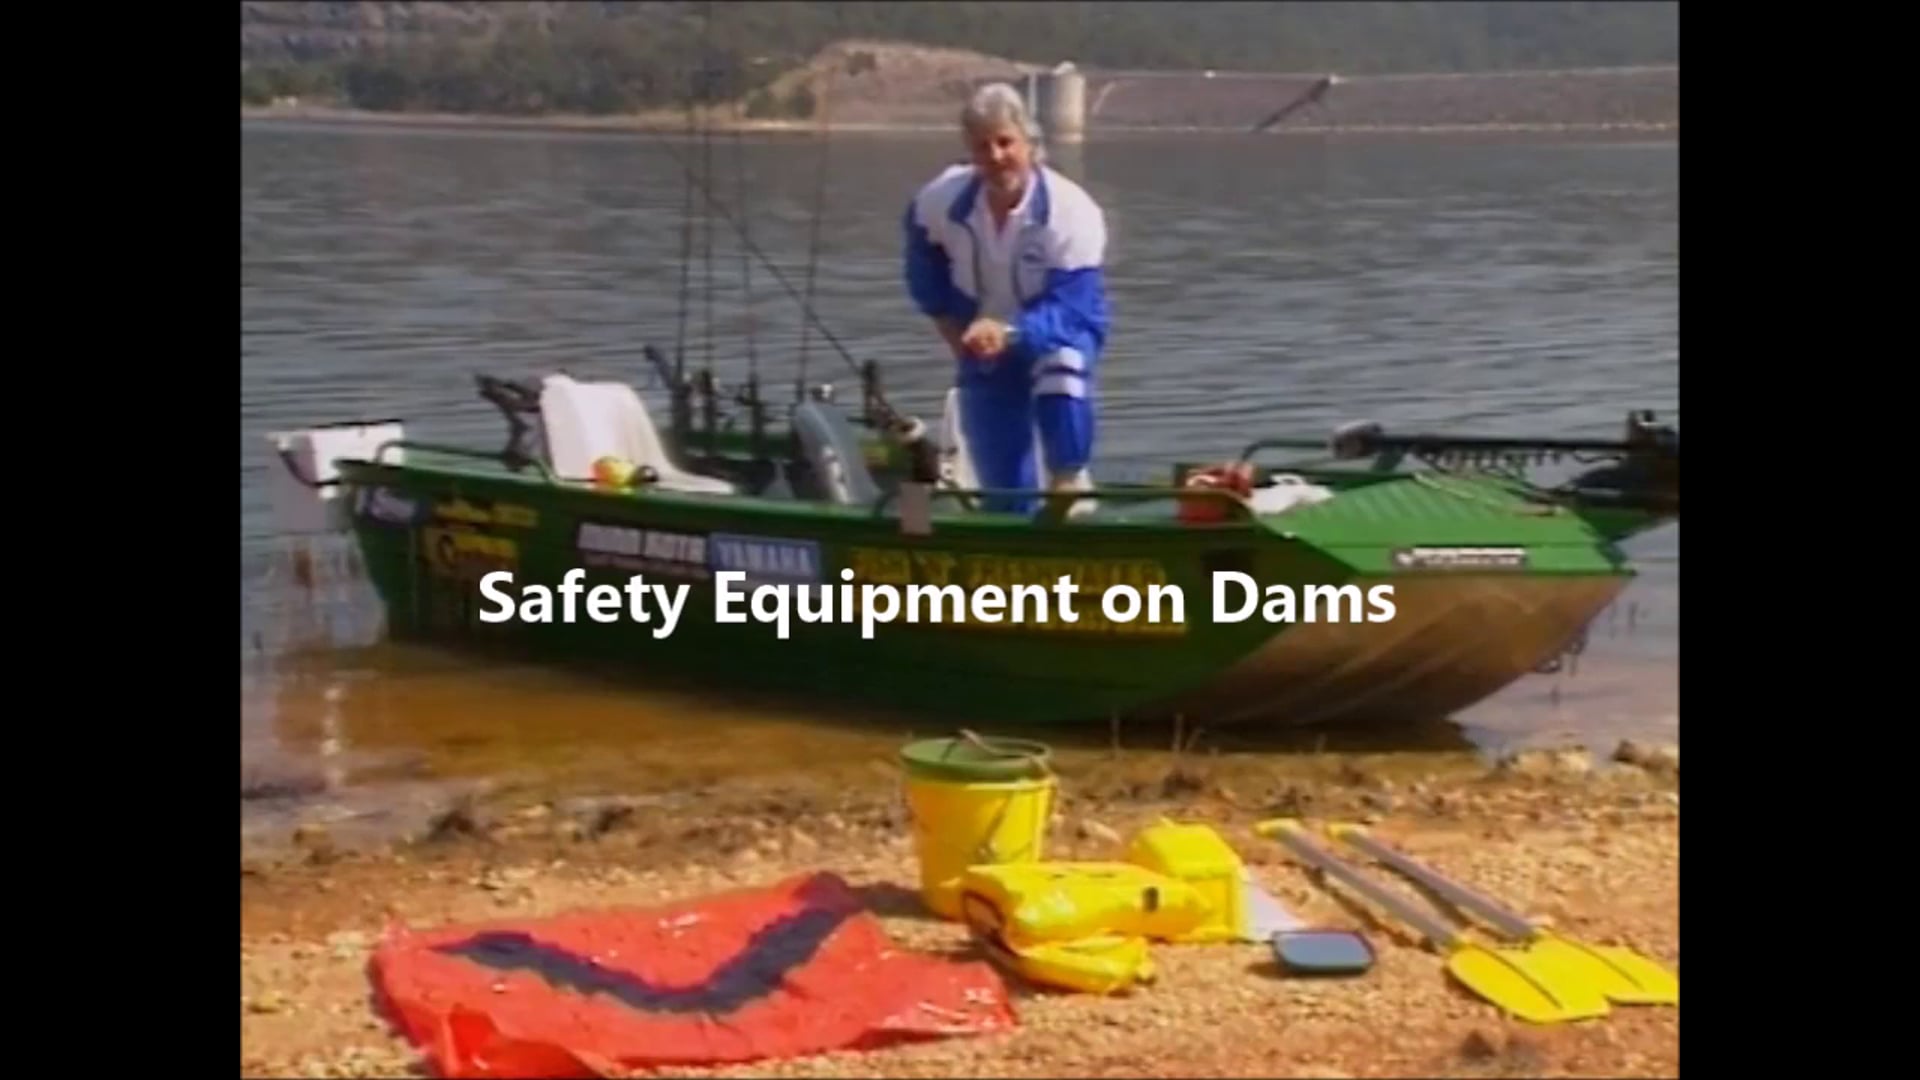 Safety Equipment on Dams